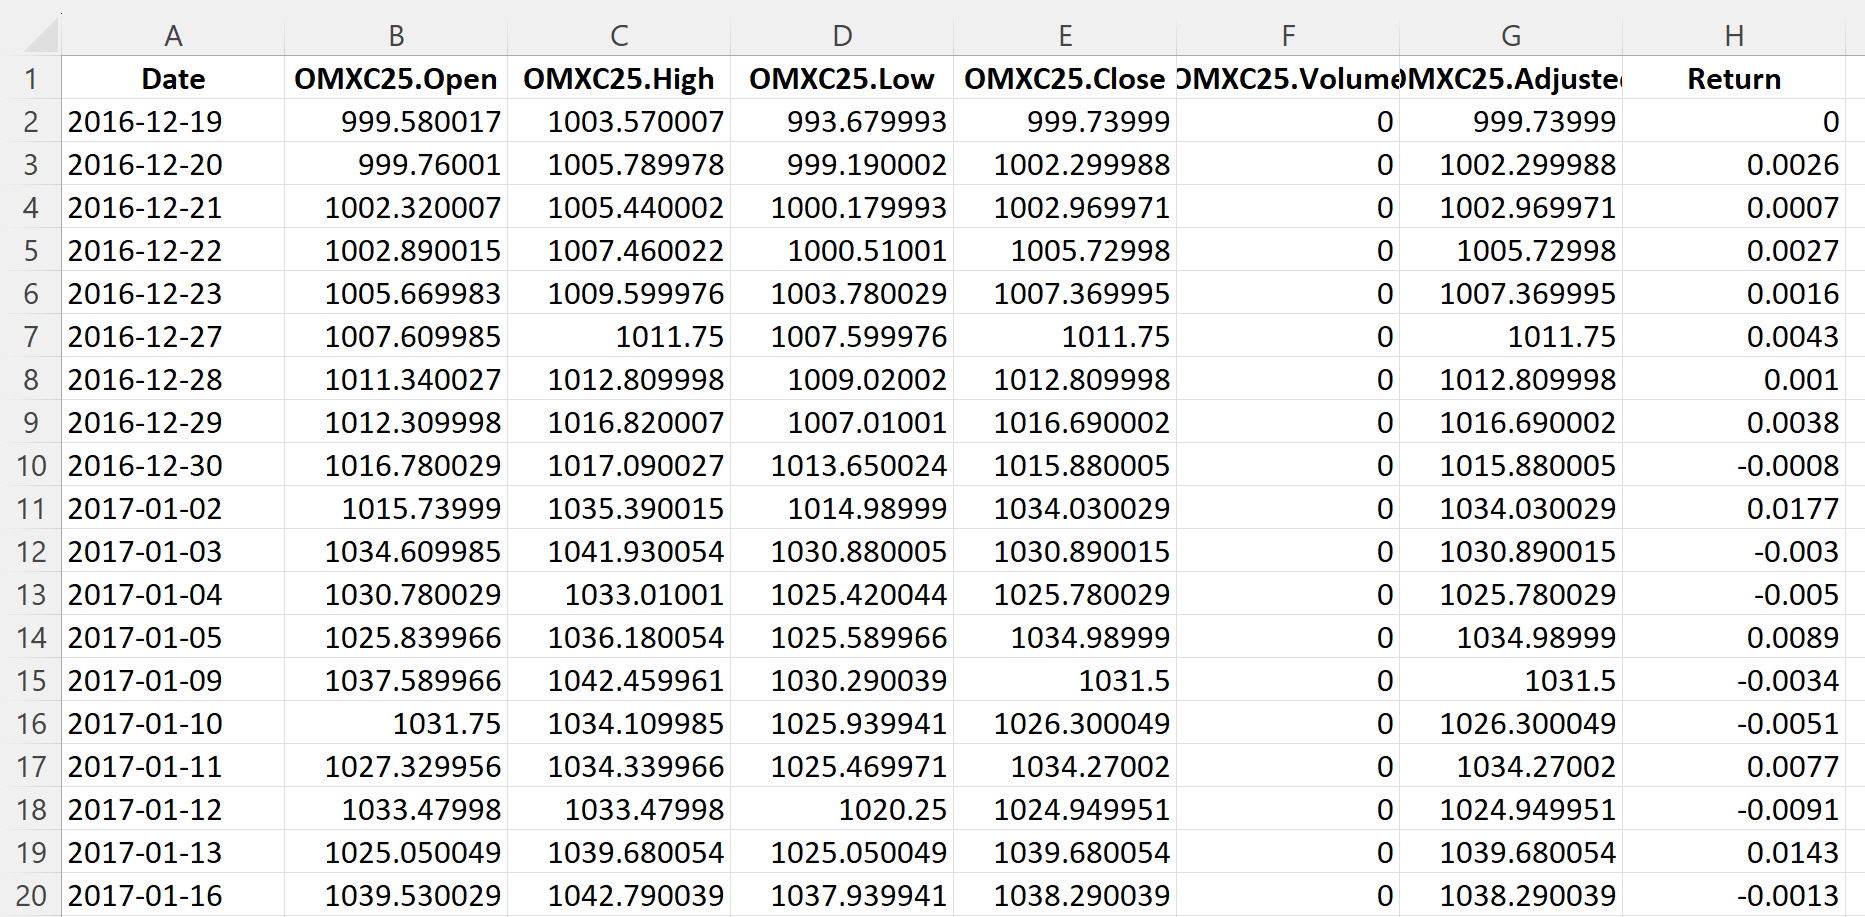 Top of the file for the OMXC 25 index data